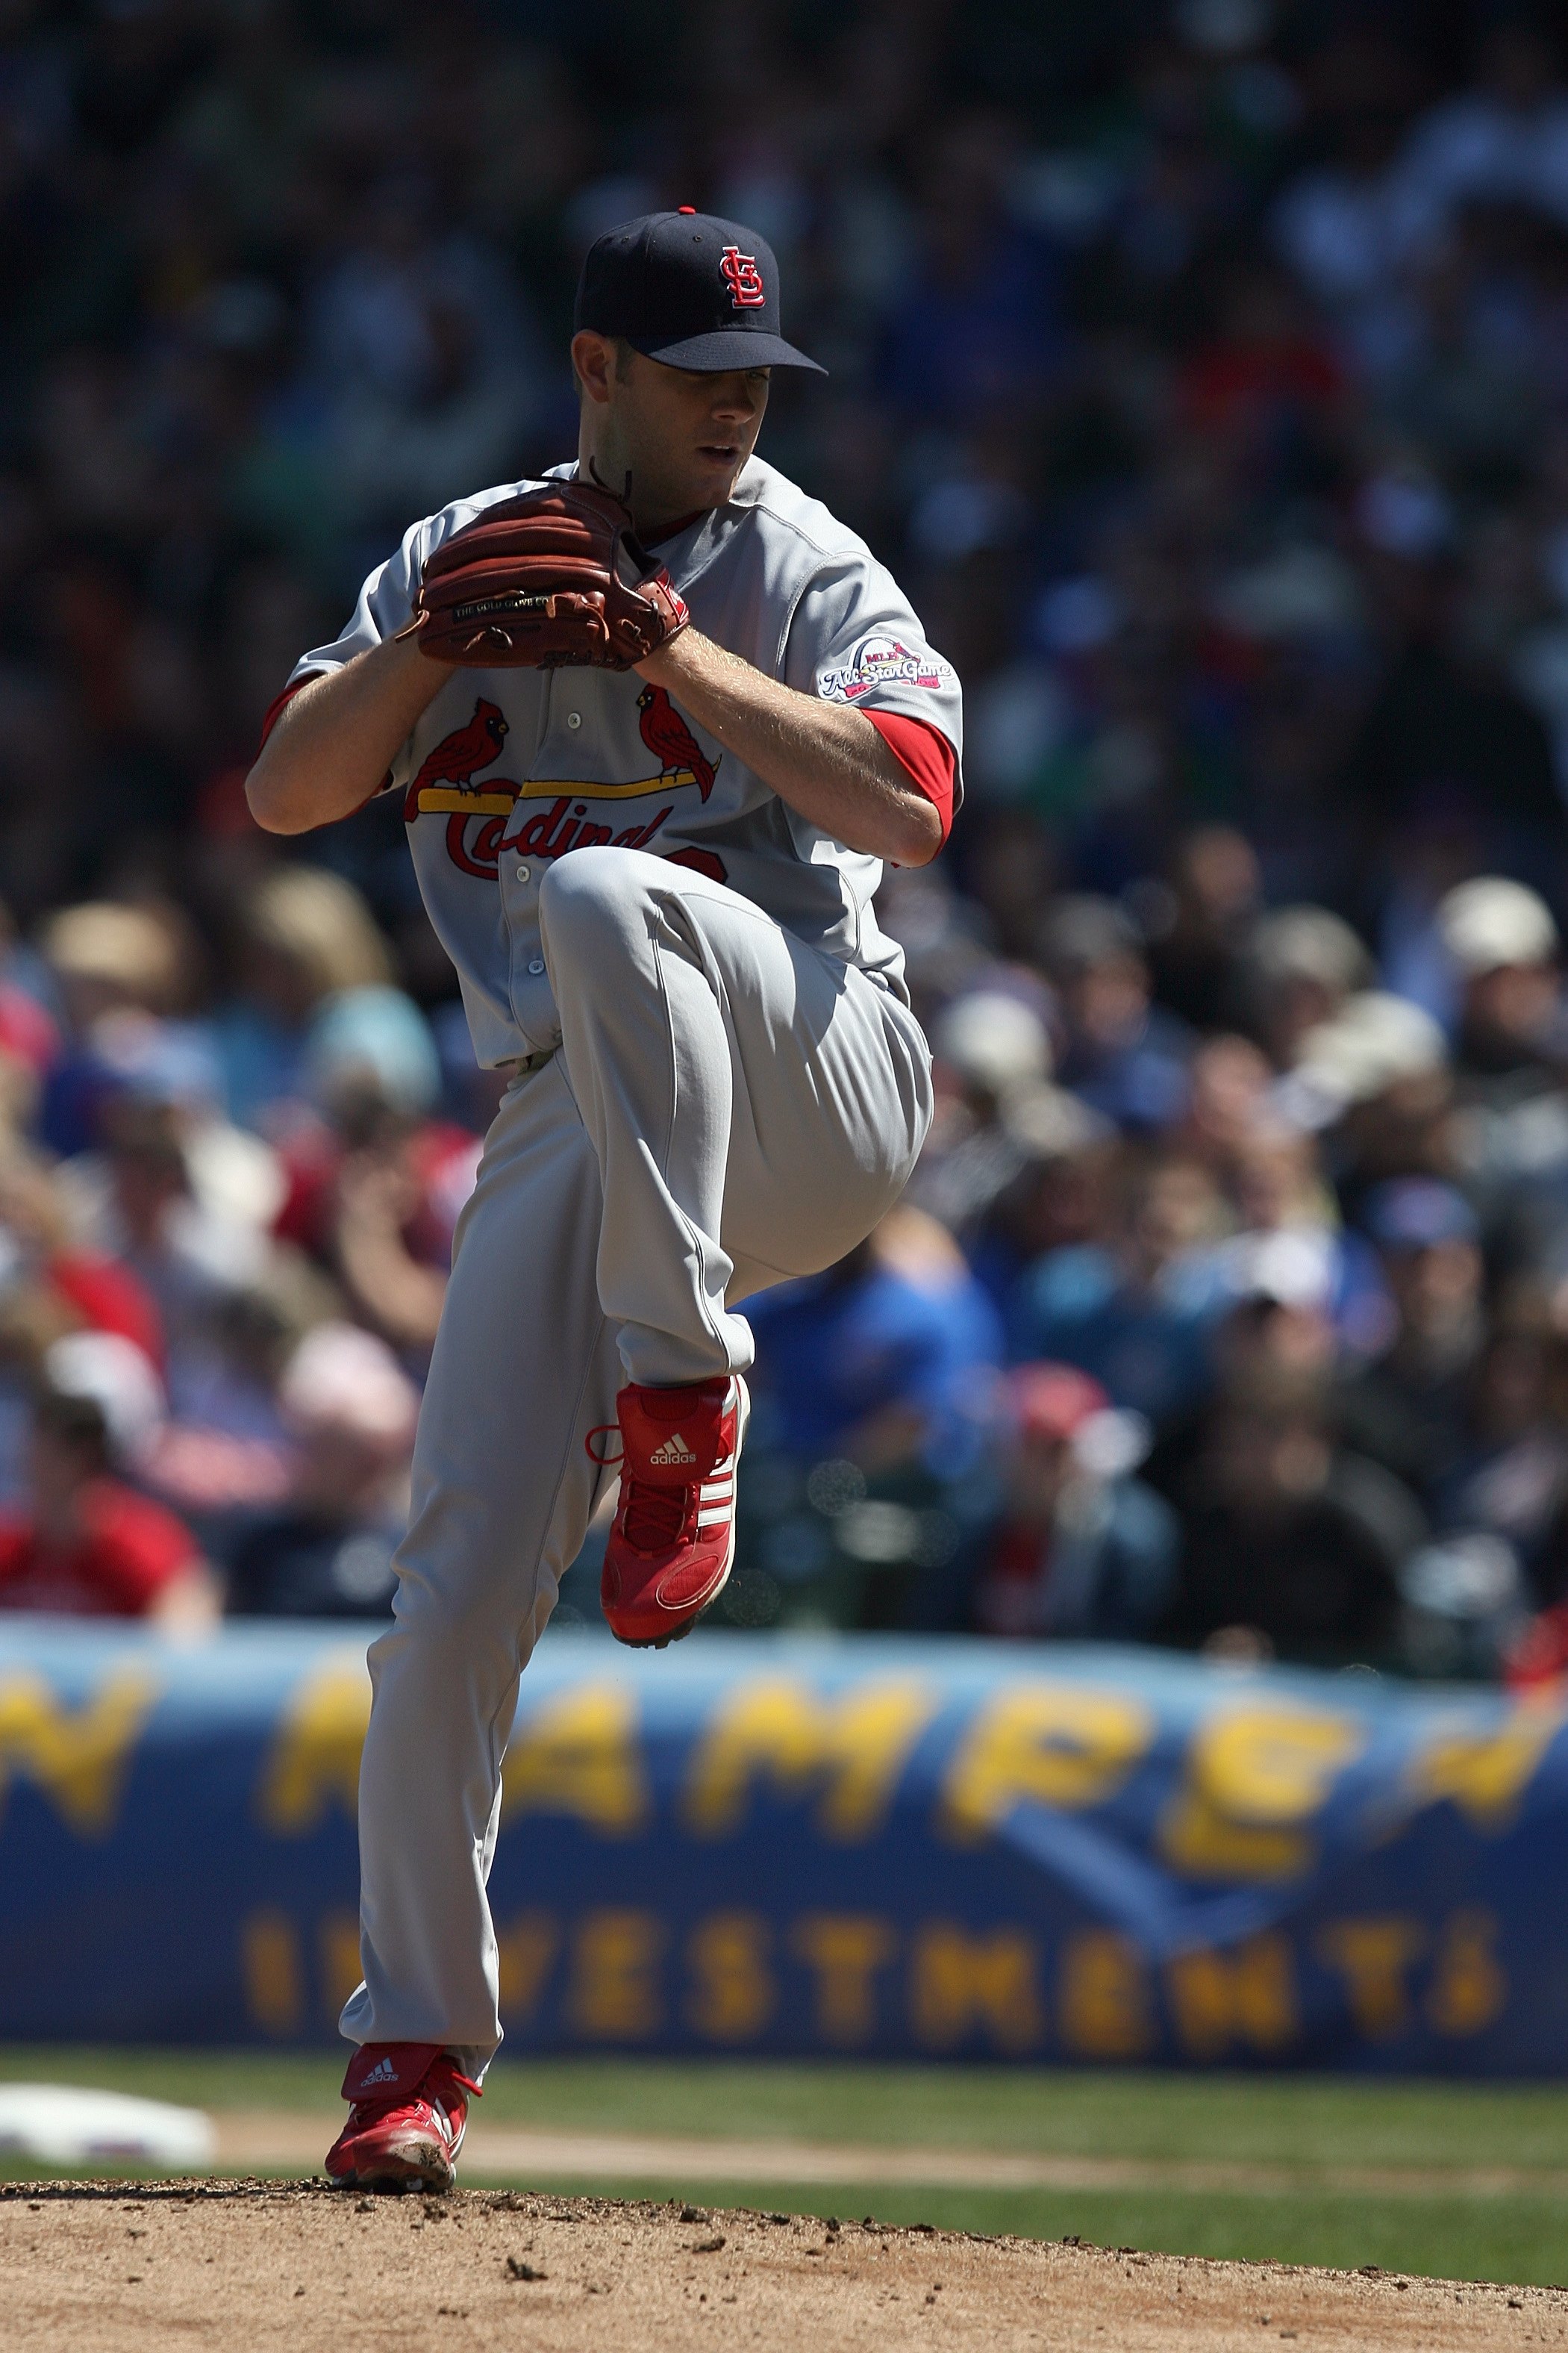 St. Louis Cardinals pitcher P.J. Walters delivers wearing the